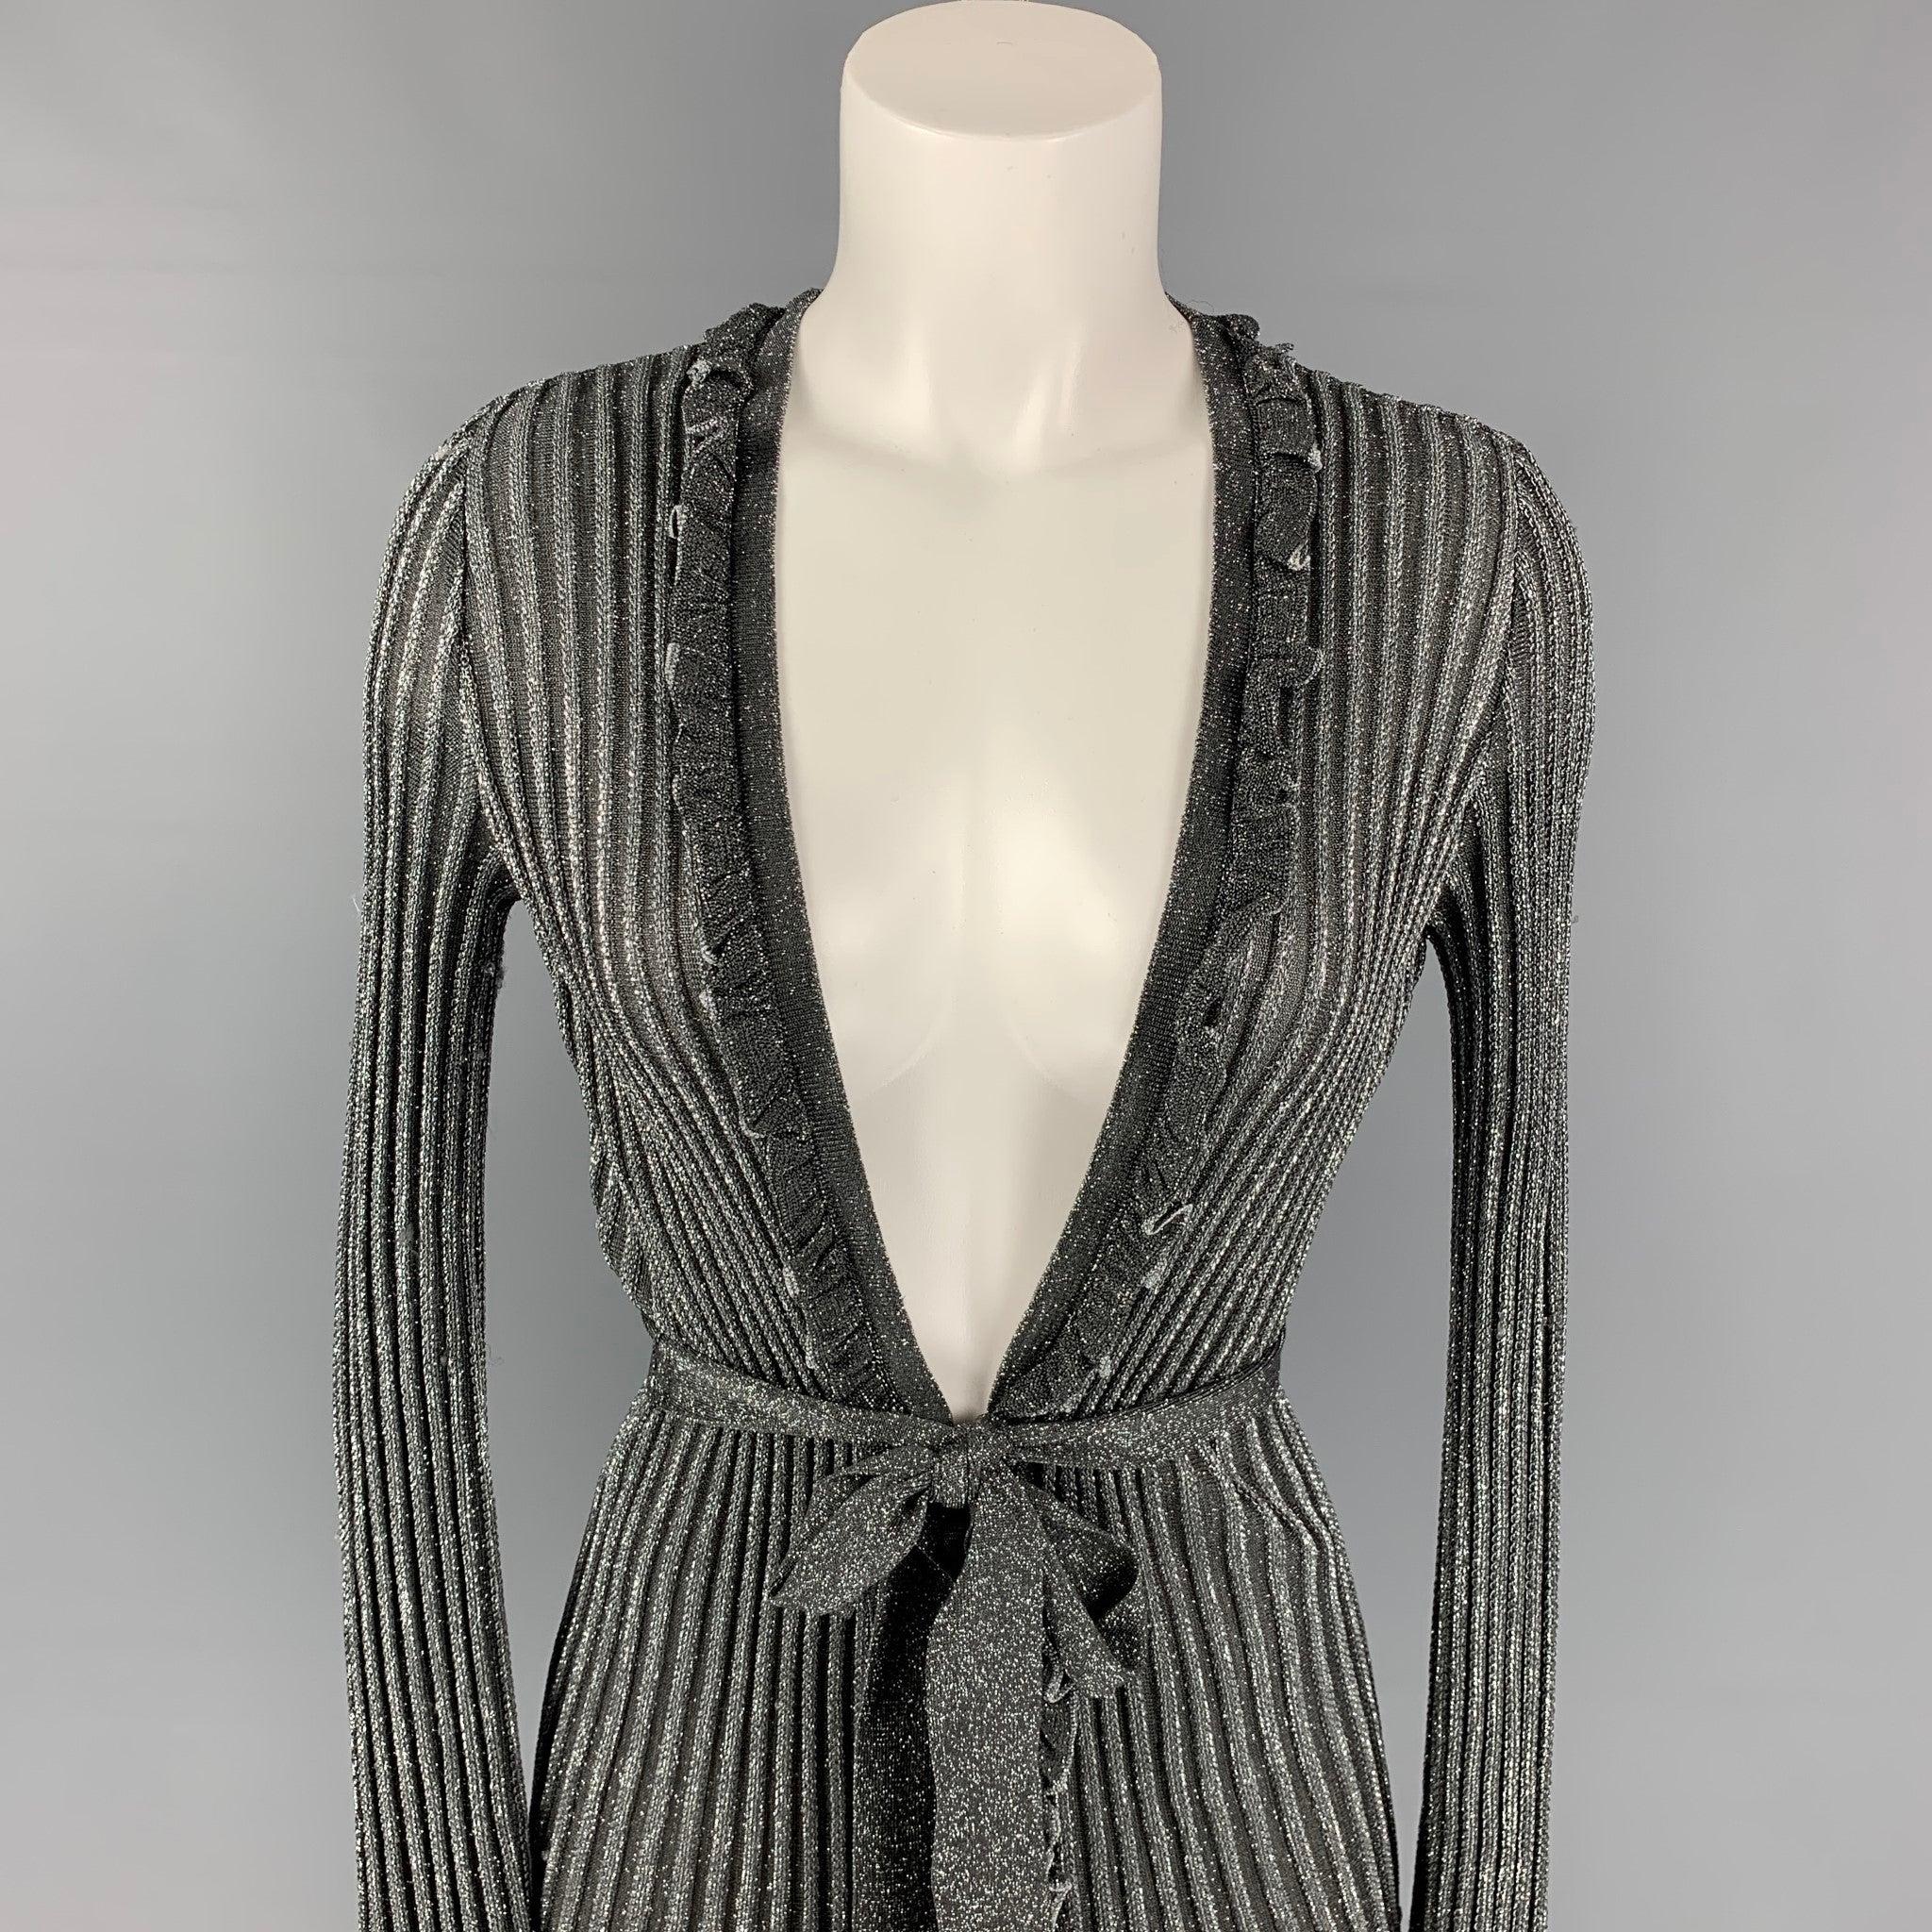 M MISSONI cardigan comes in a silver & black metallic featuring a ruffled trim and a belted style. Made in Italy.
Very Good
Pre-Owned Condition. 

Marked:  
 I 40 / D 34 / A 34 / EFB 36 / GB 8 / USA 4 

Measurements: 
 
Shoulder: 14.5 inches  Bust: